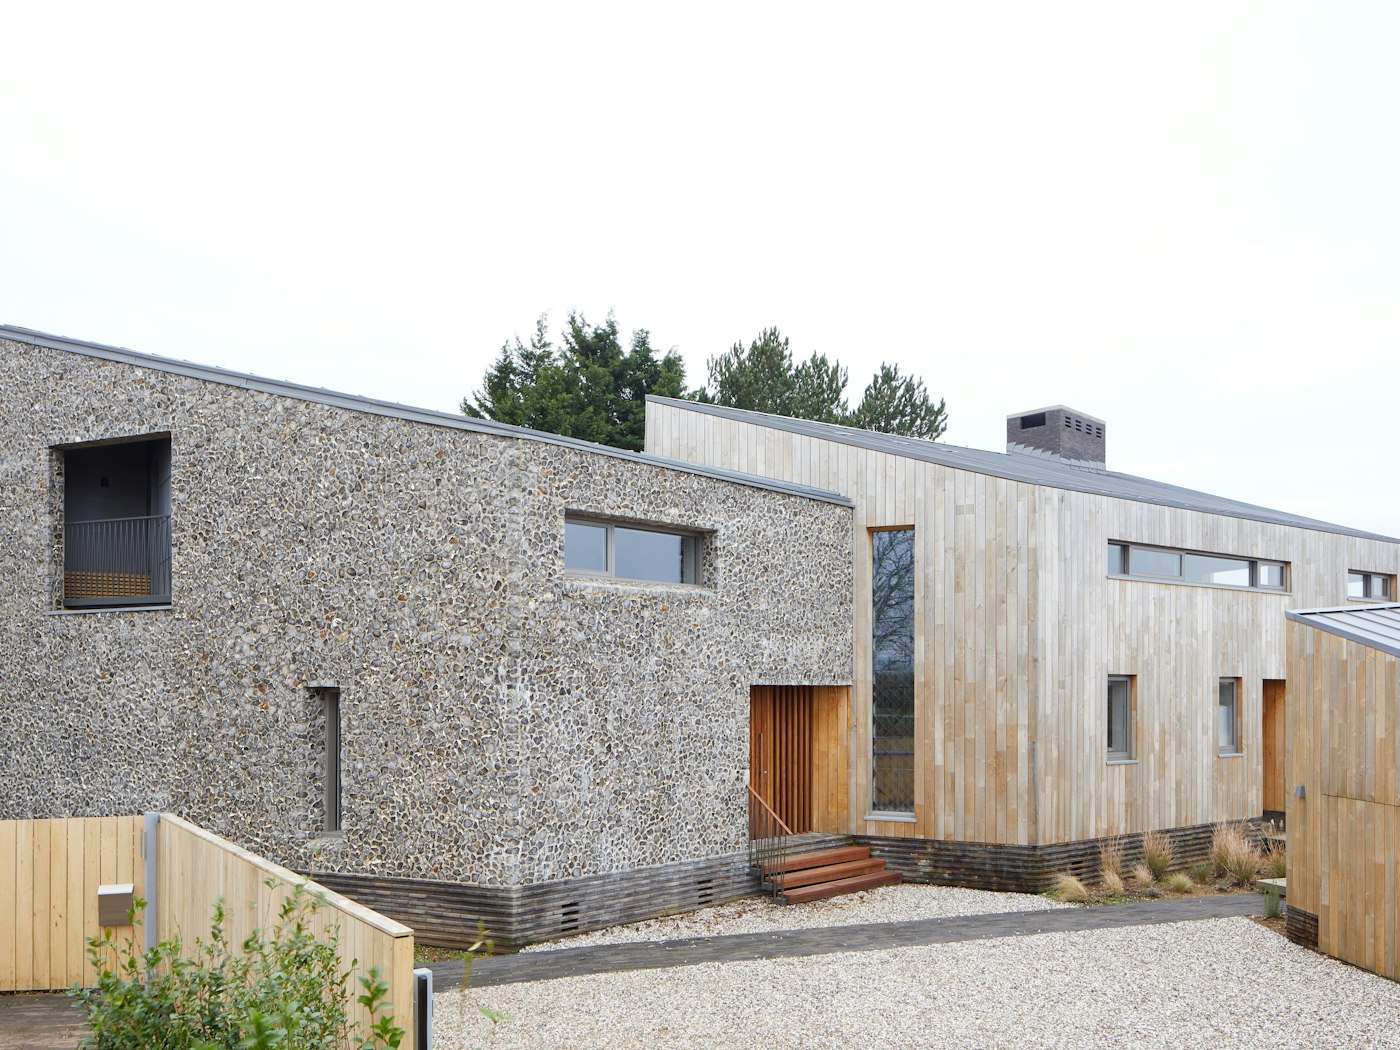 The mix of cladding and flint stone walls is the perfect compliment to its Nofolk location